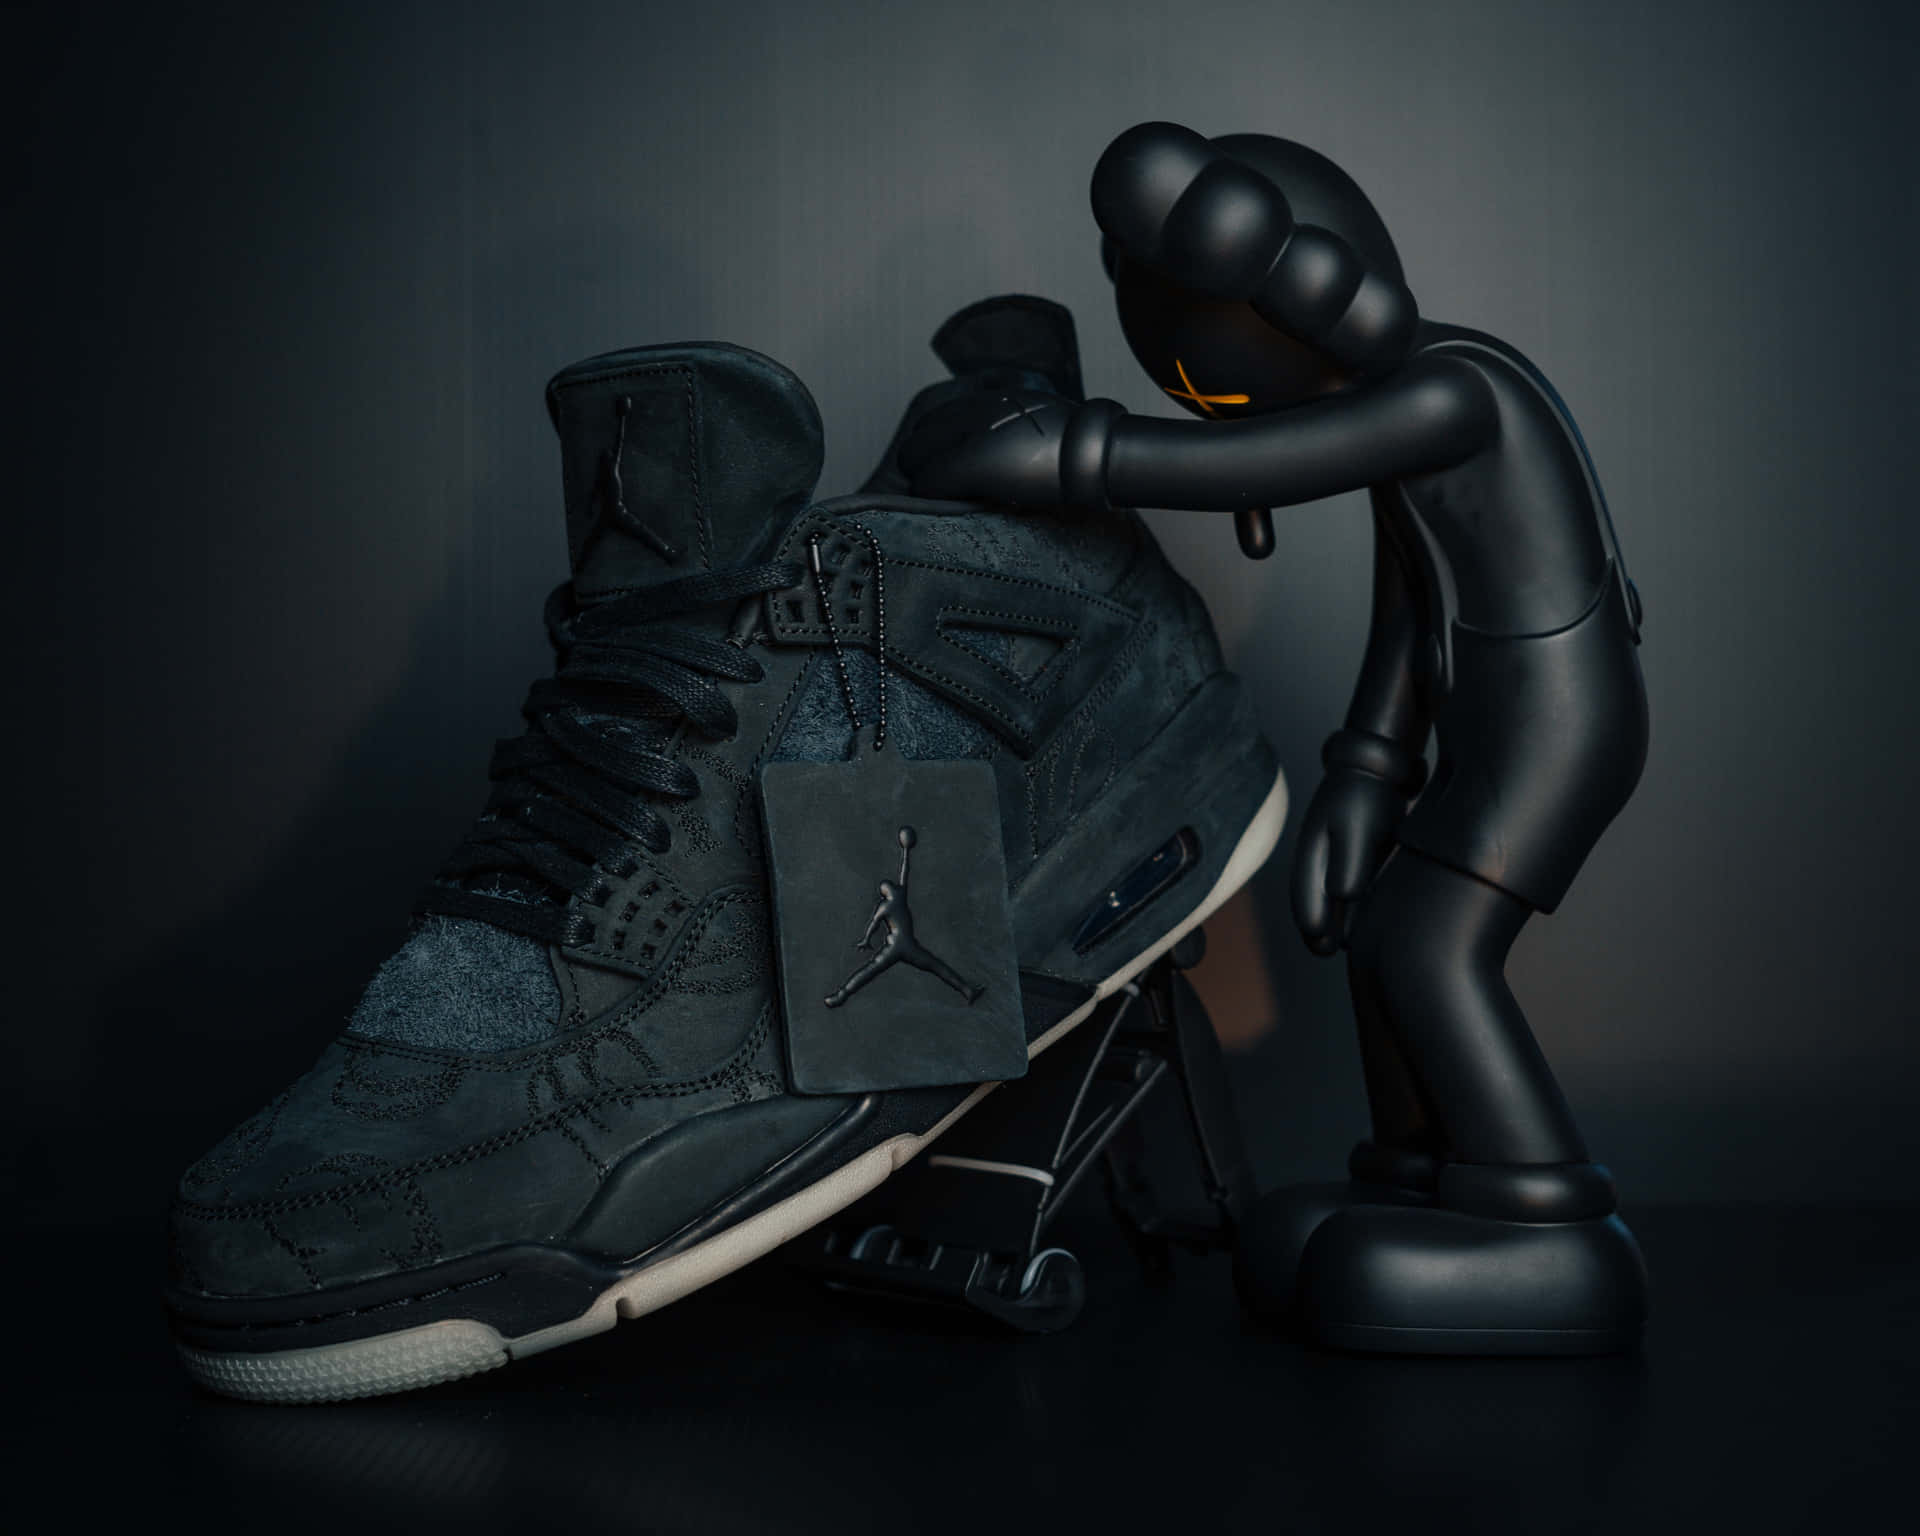 KAWS Companion: The Iconic Character Reimagined